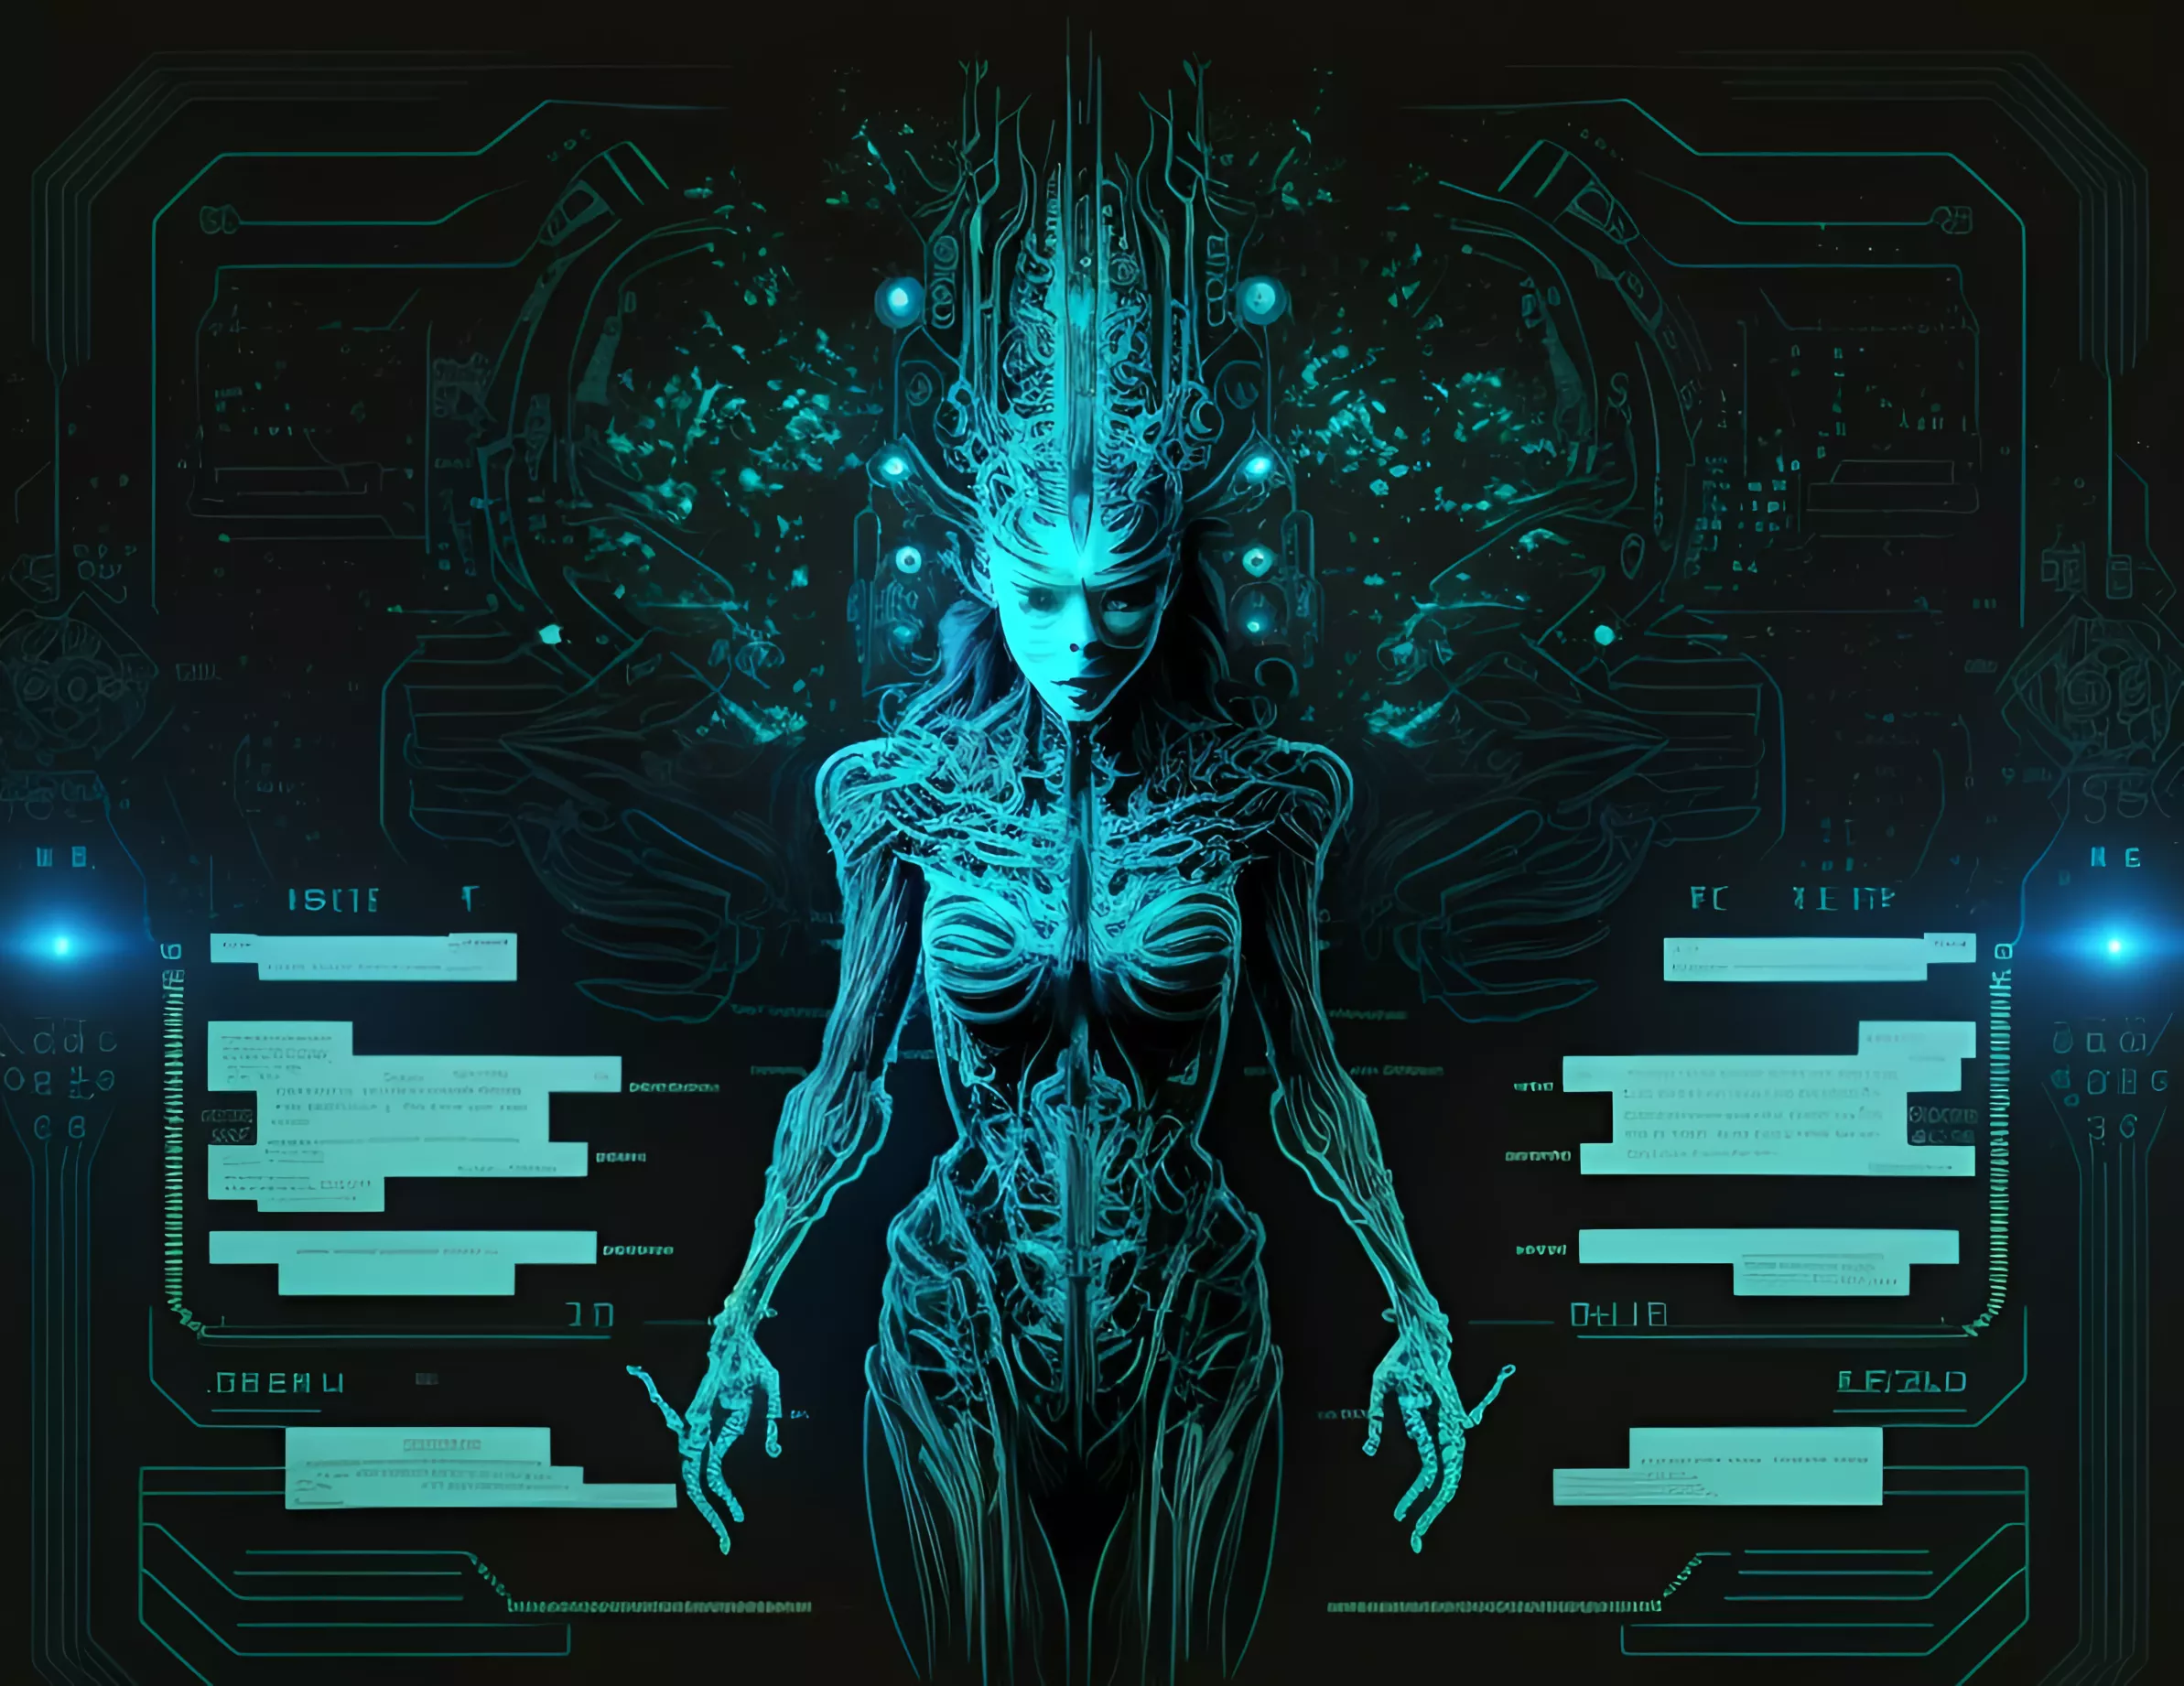 System Shock publisher faces anger for using AI-generated artwork, says it wanted to start a conversation